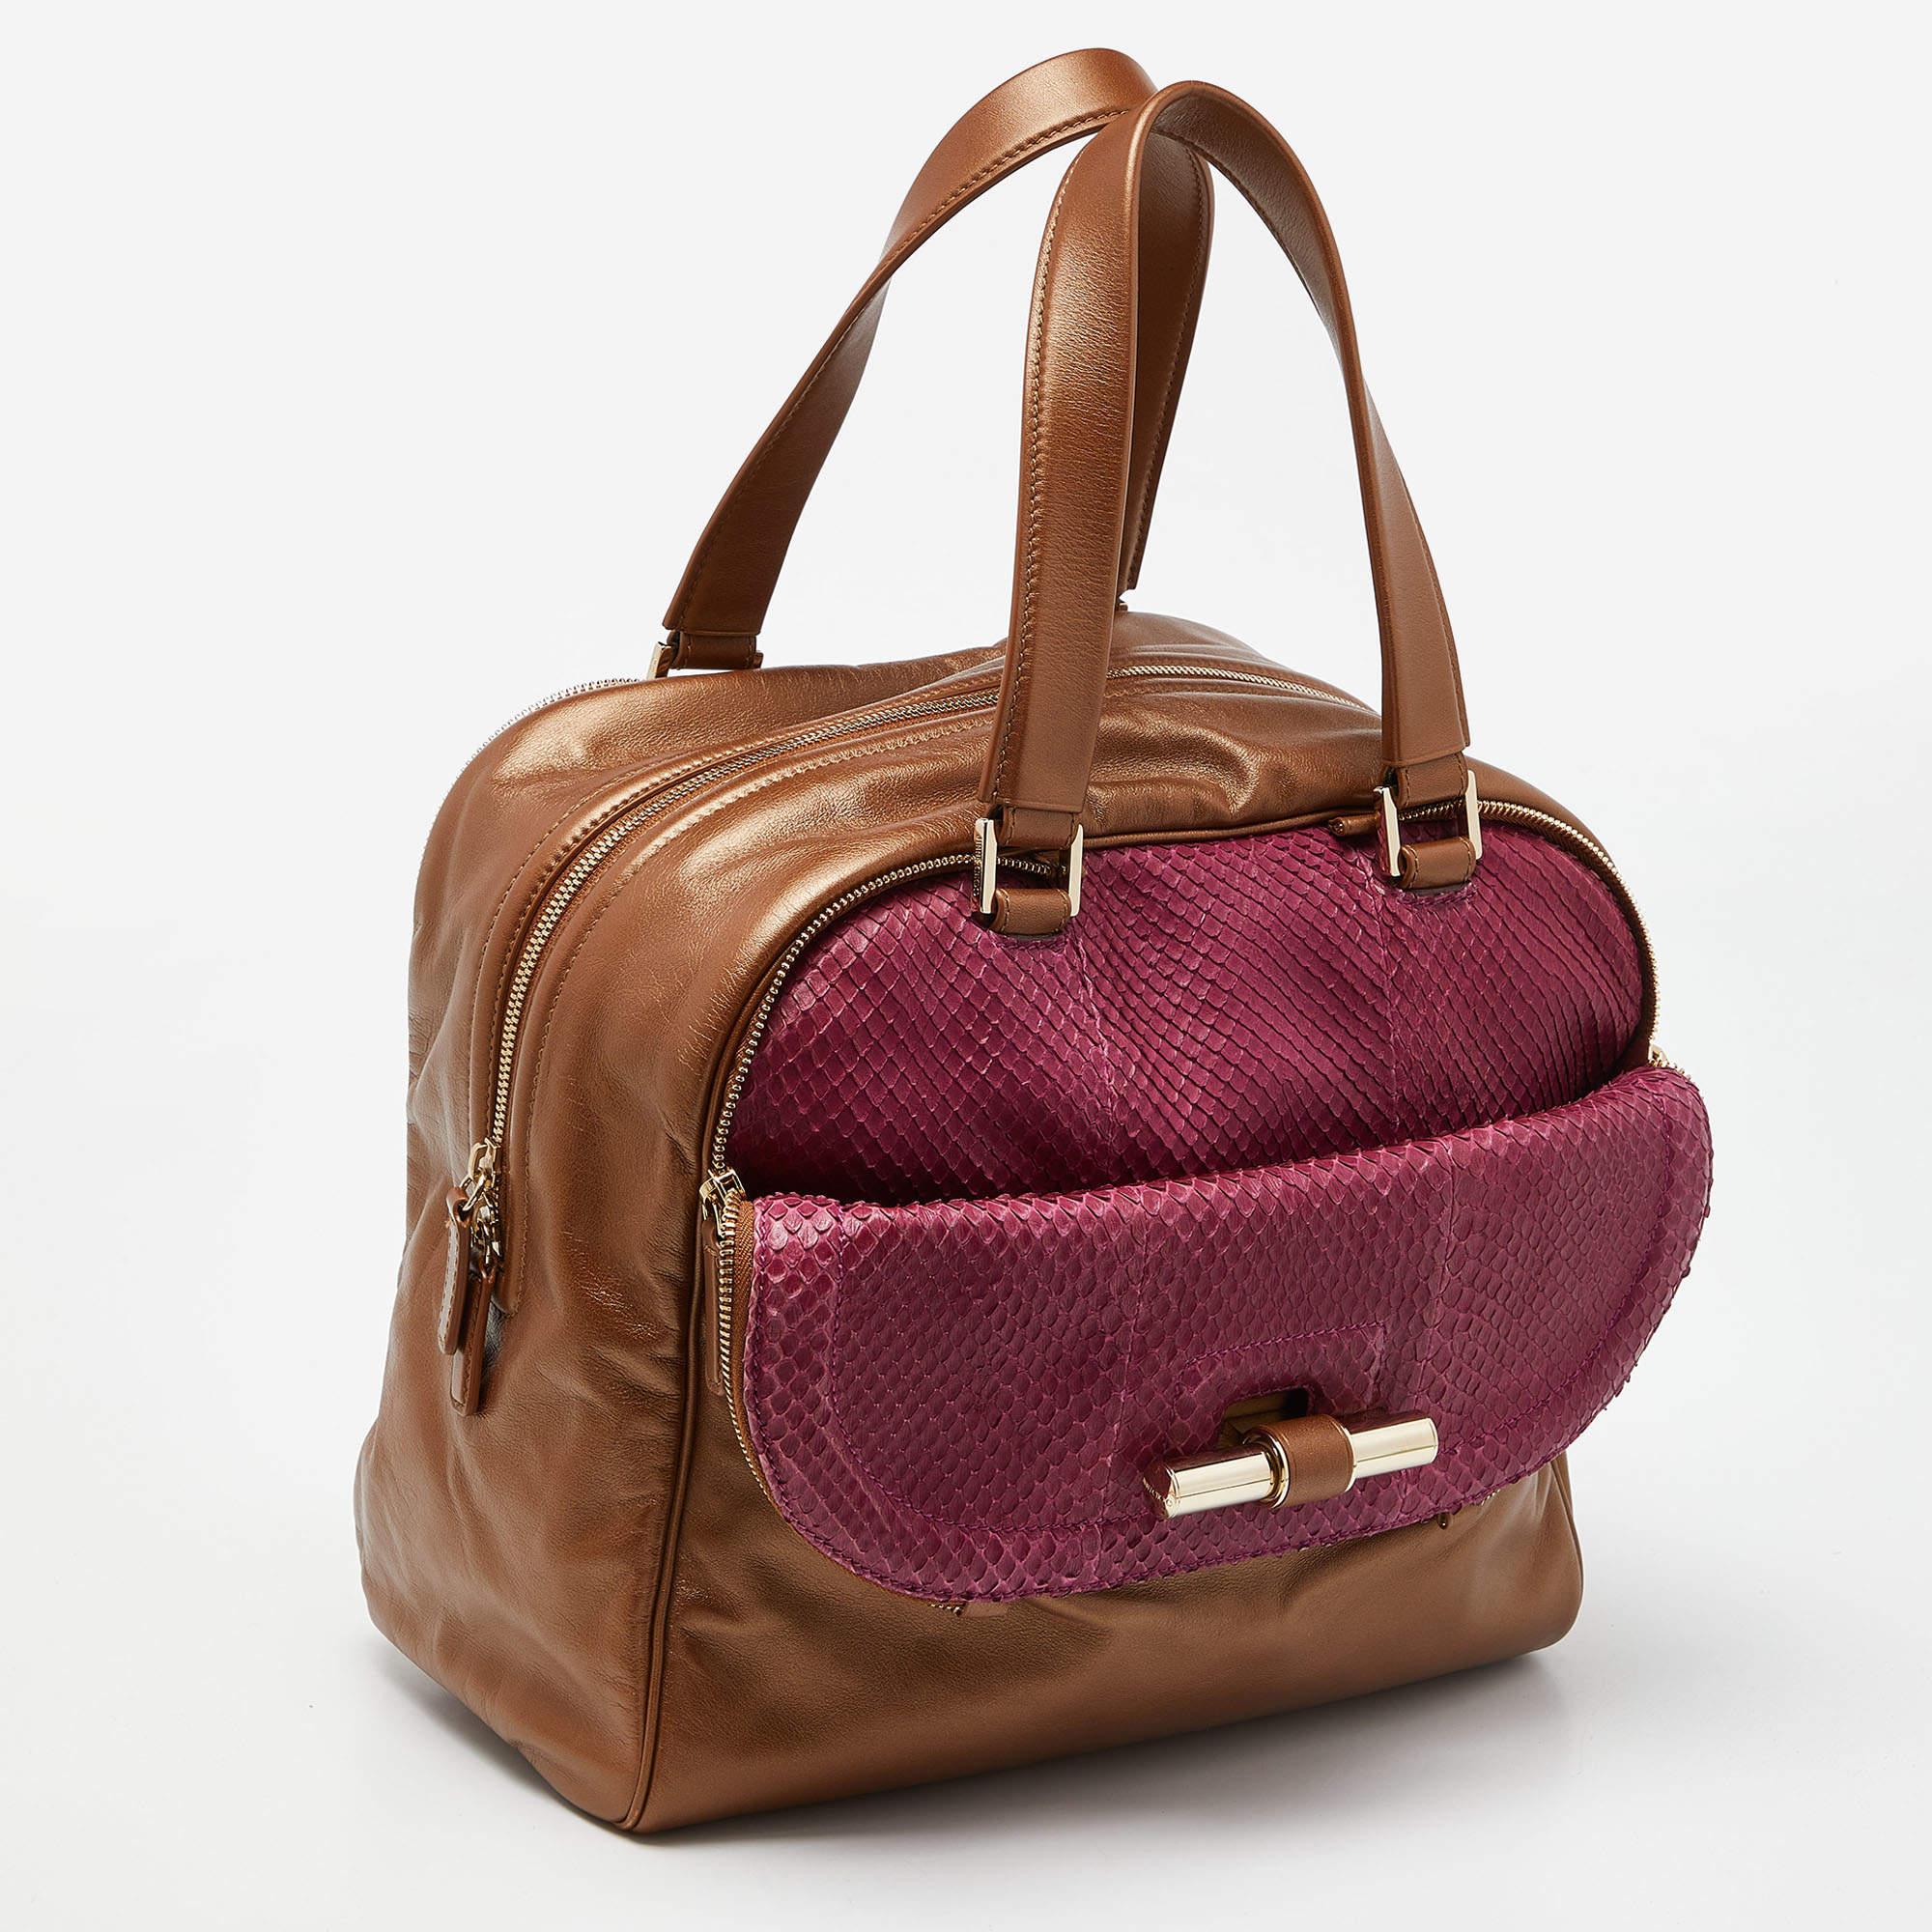 This satchel is rendered in the finest quality materials into an elegant design. Versatile and functional, it is well-sized for your daily use.

